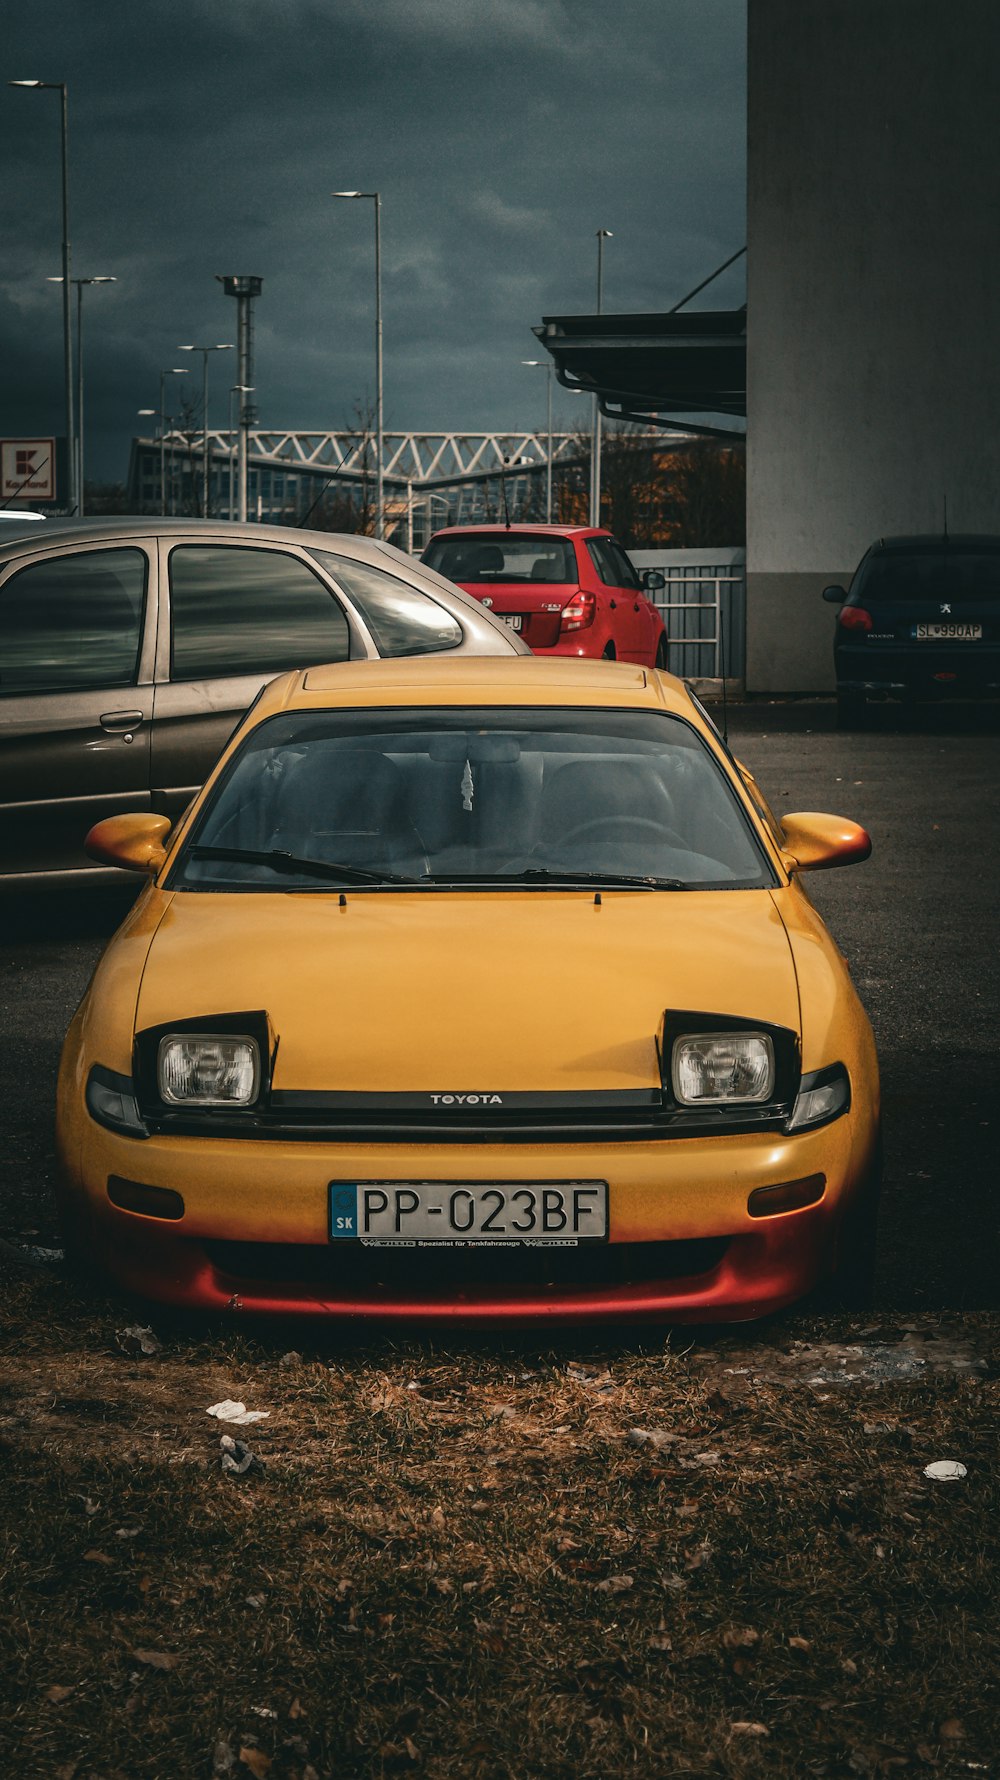 a yellow car parked in a parking lot